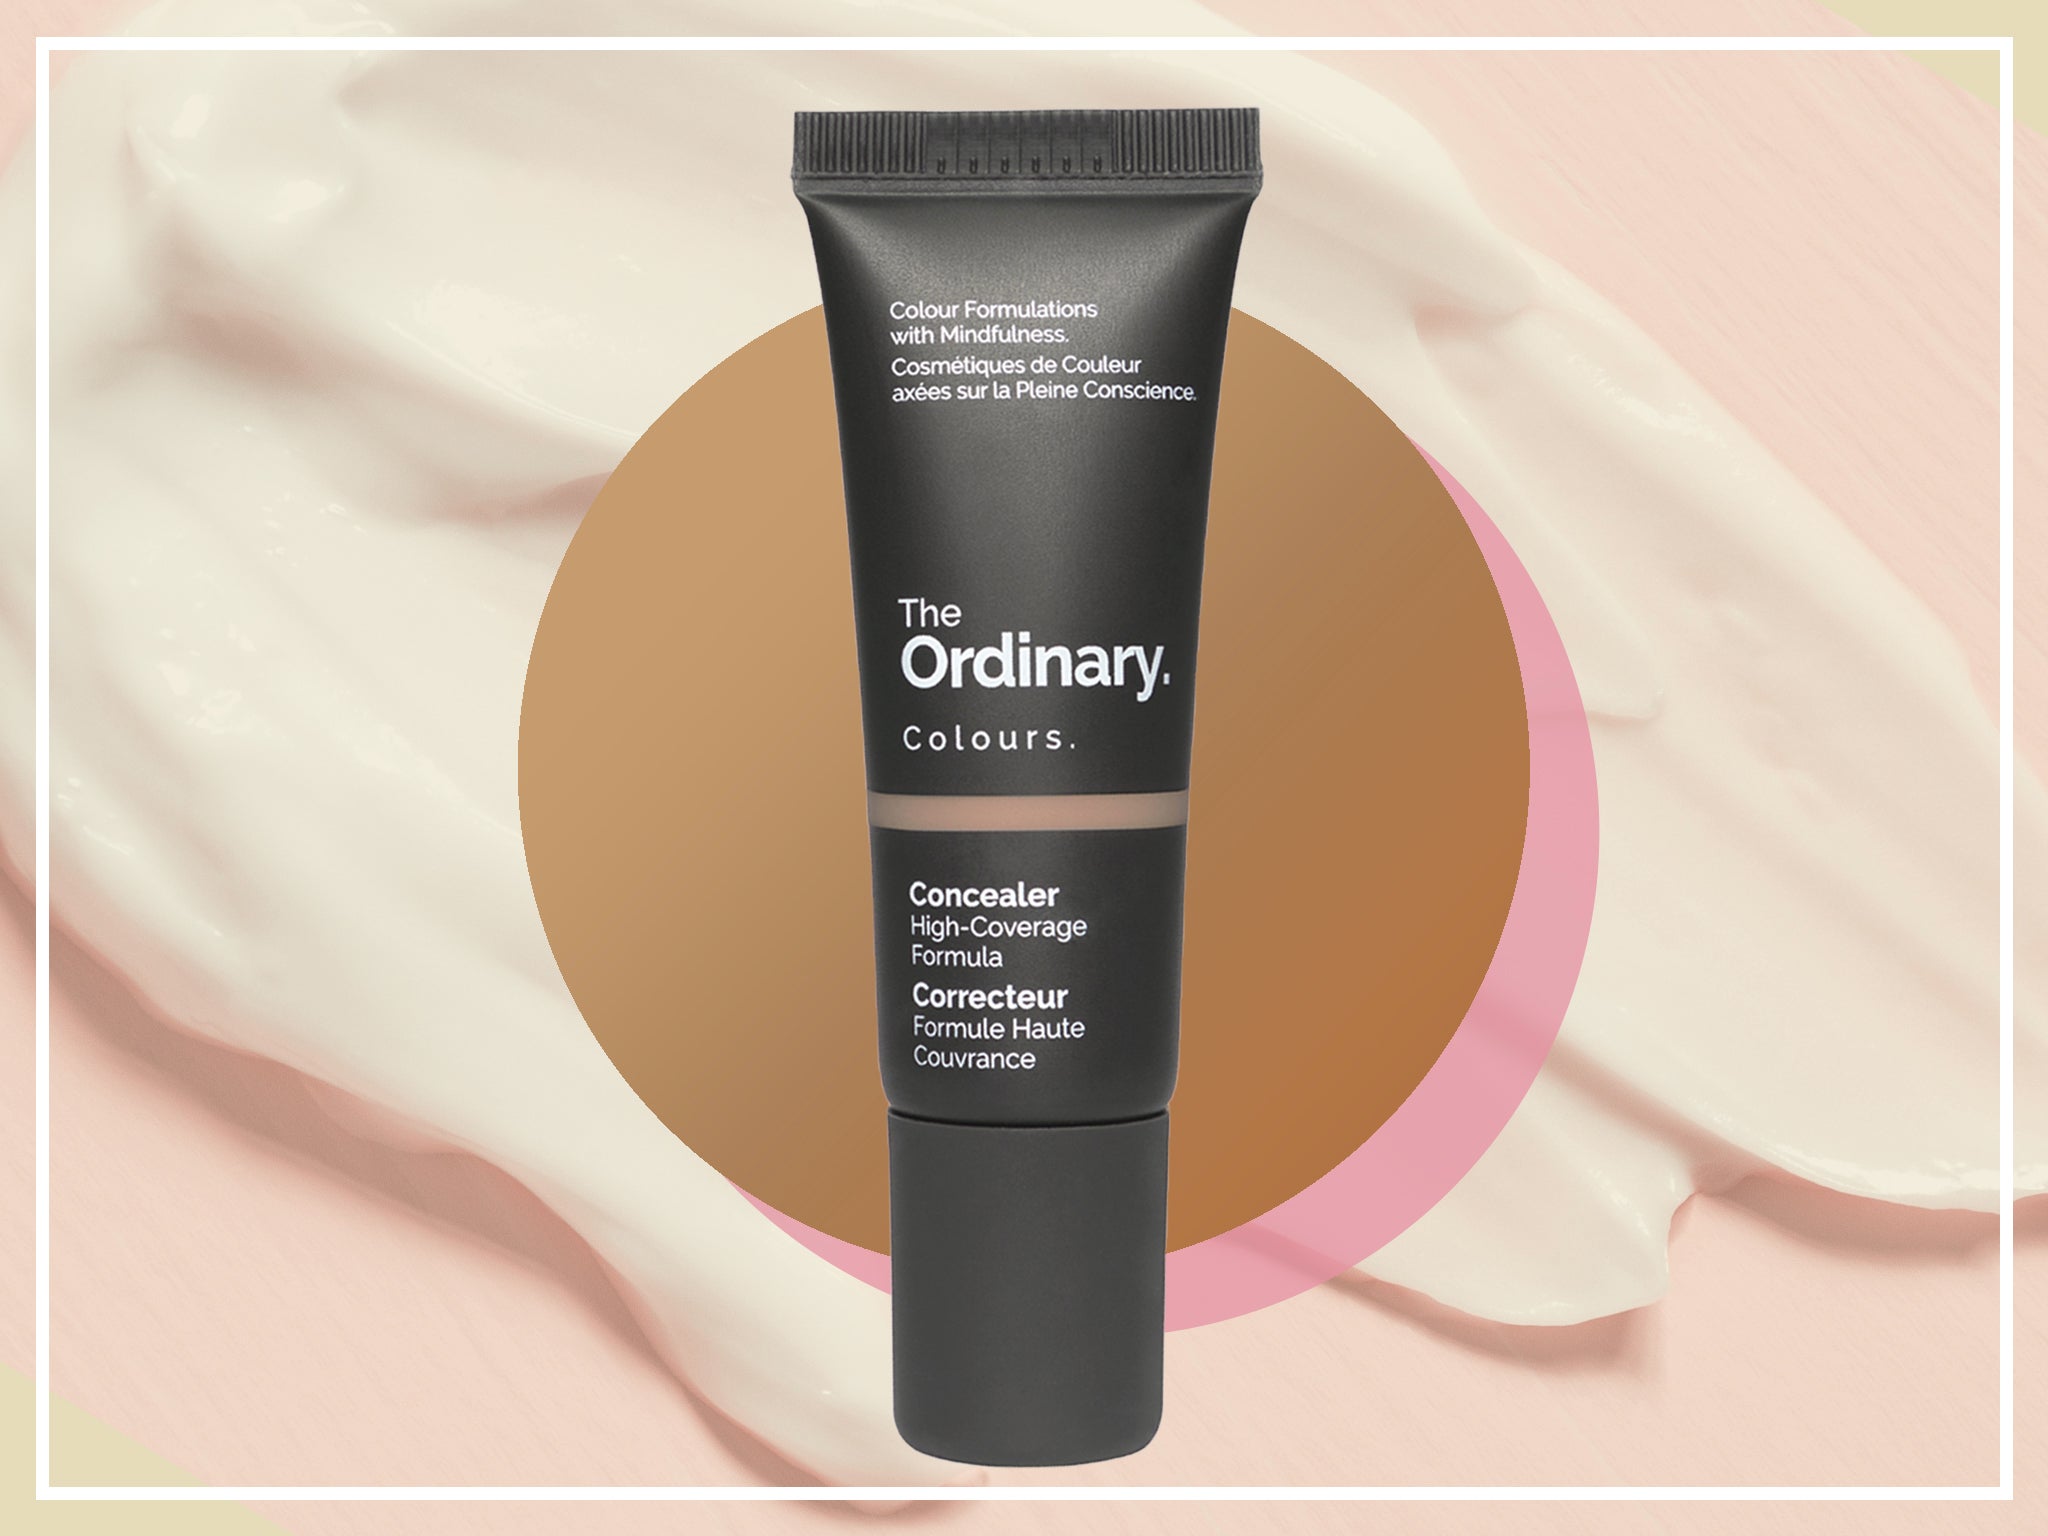 We tried The Ordinary’s first-ever concealer, here’s our review